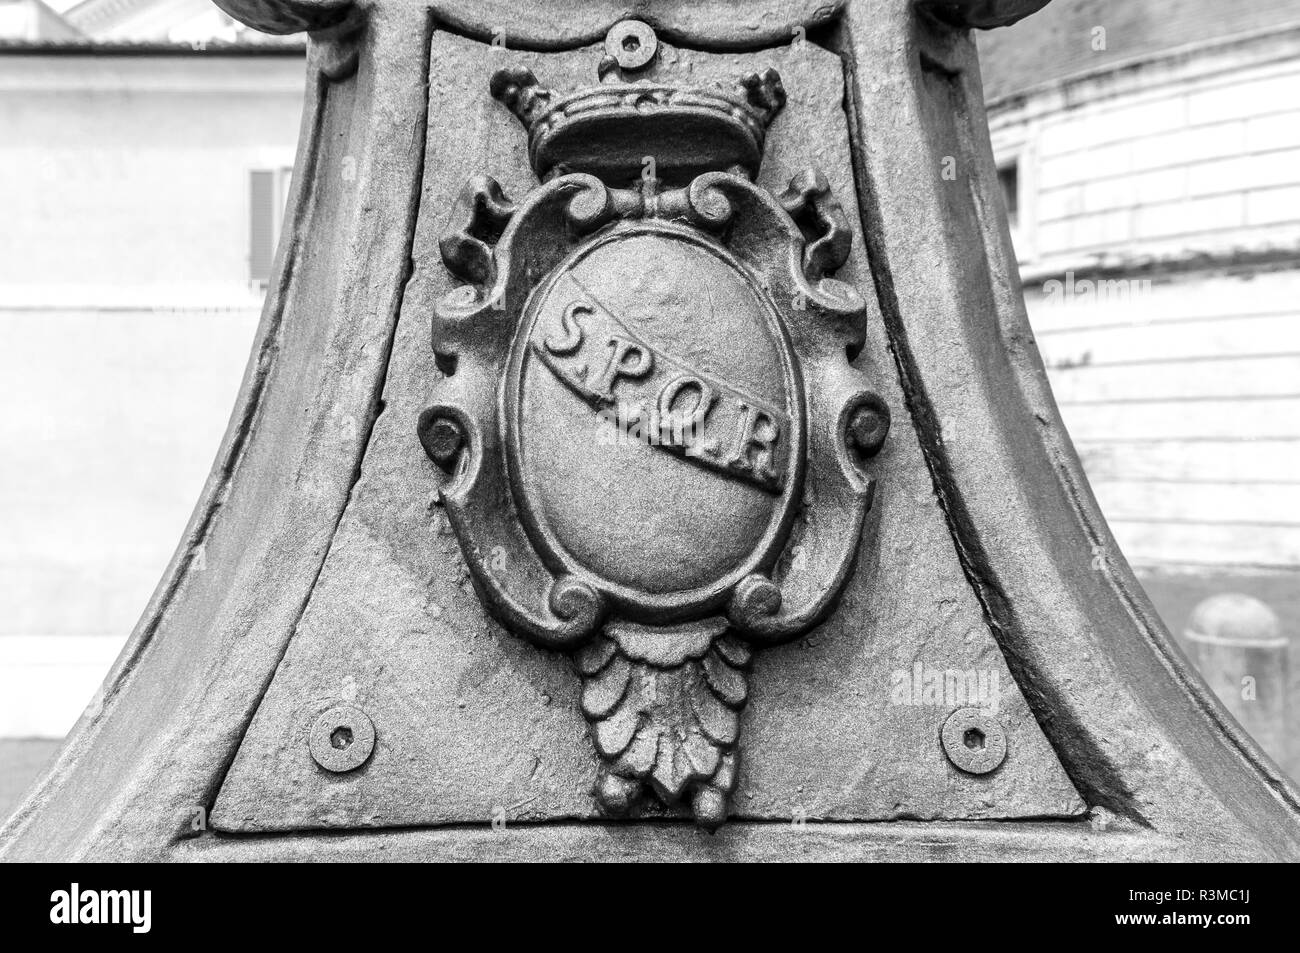 Bas-relief of the SPQR symbol of the city on a lamppost in Rome, Italy Stock Photo